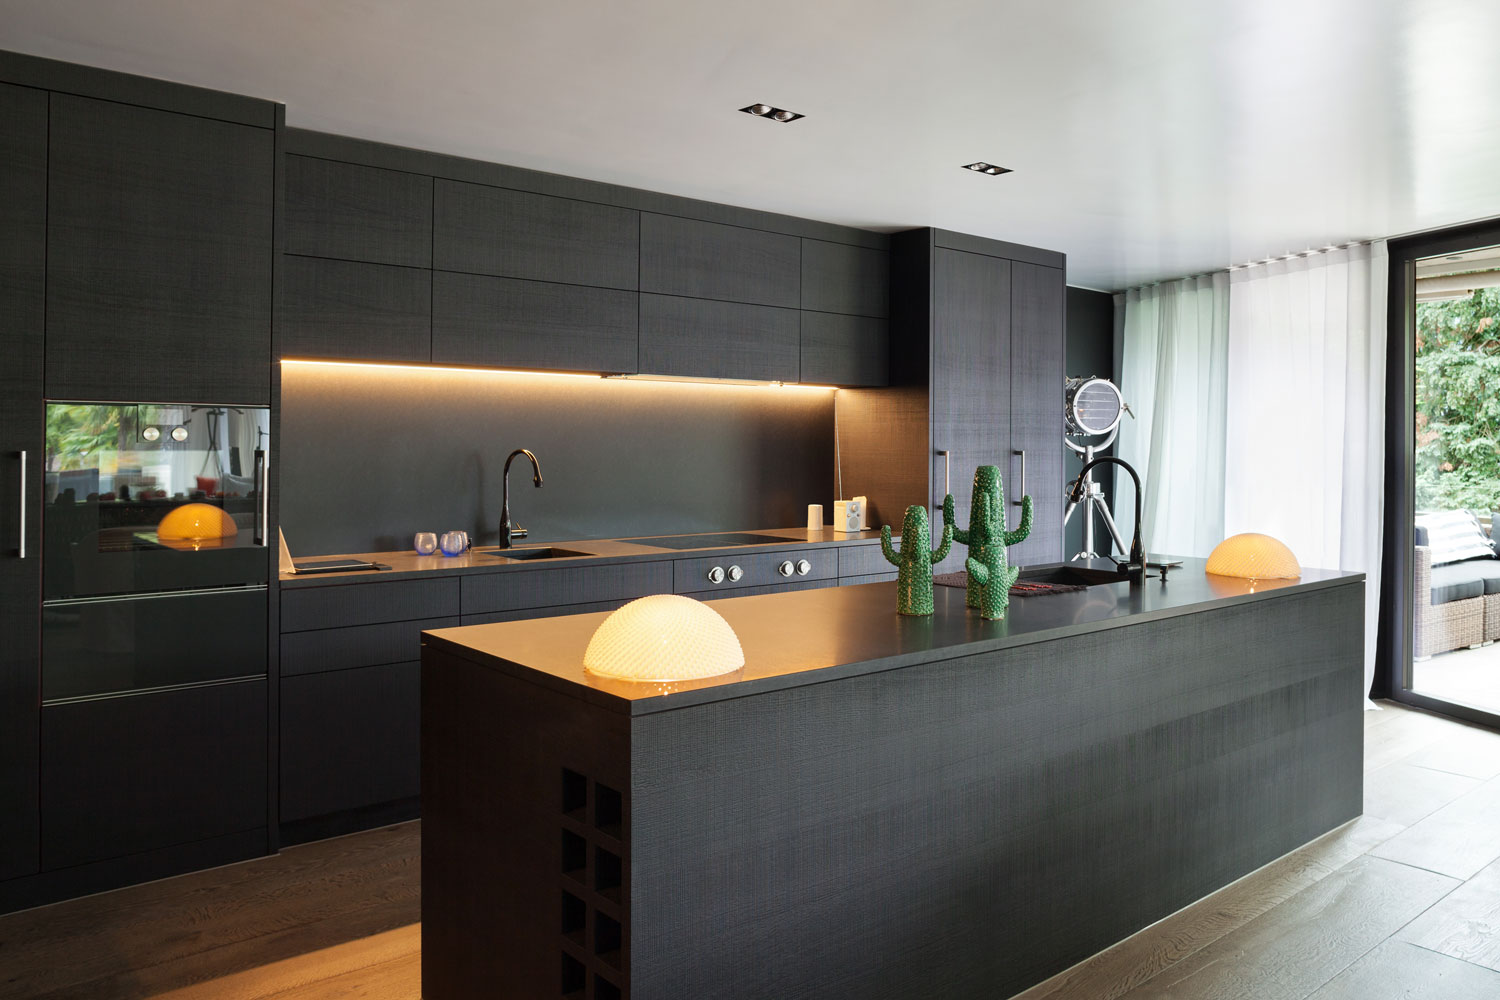 Ultra modern kitchen with black painted cabinet, worktops, cabinets and backlighting on the sink area